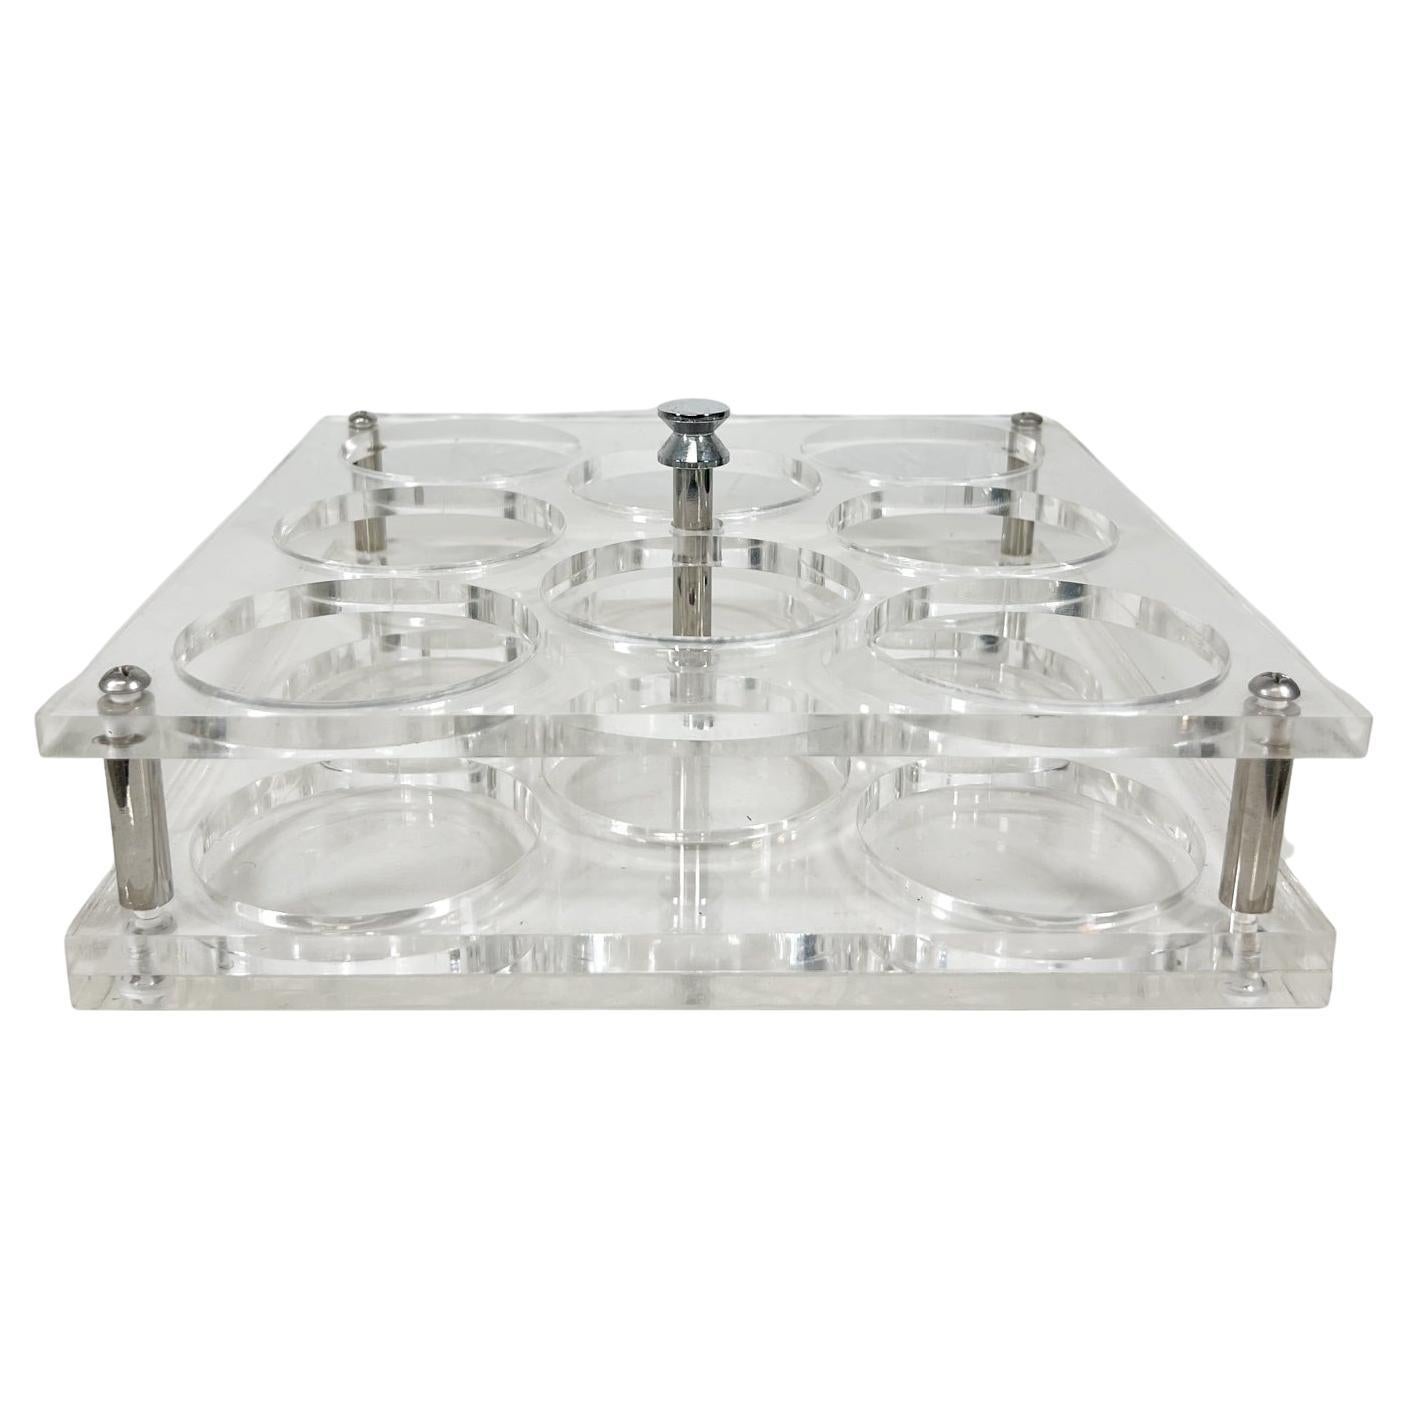 1970s Modernist Lucite Beverage Bar Drink Carrier Eight Glass Serving Tray